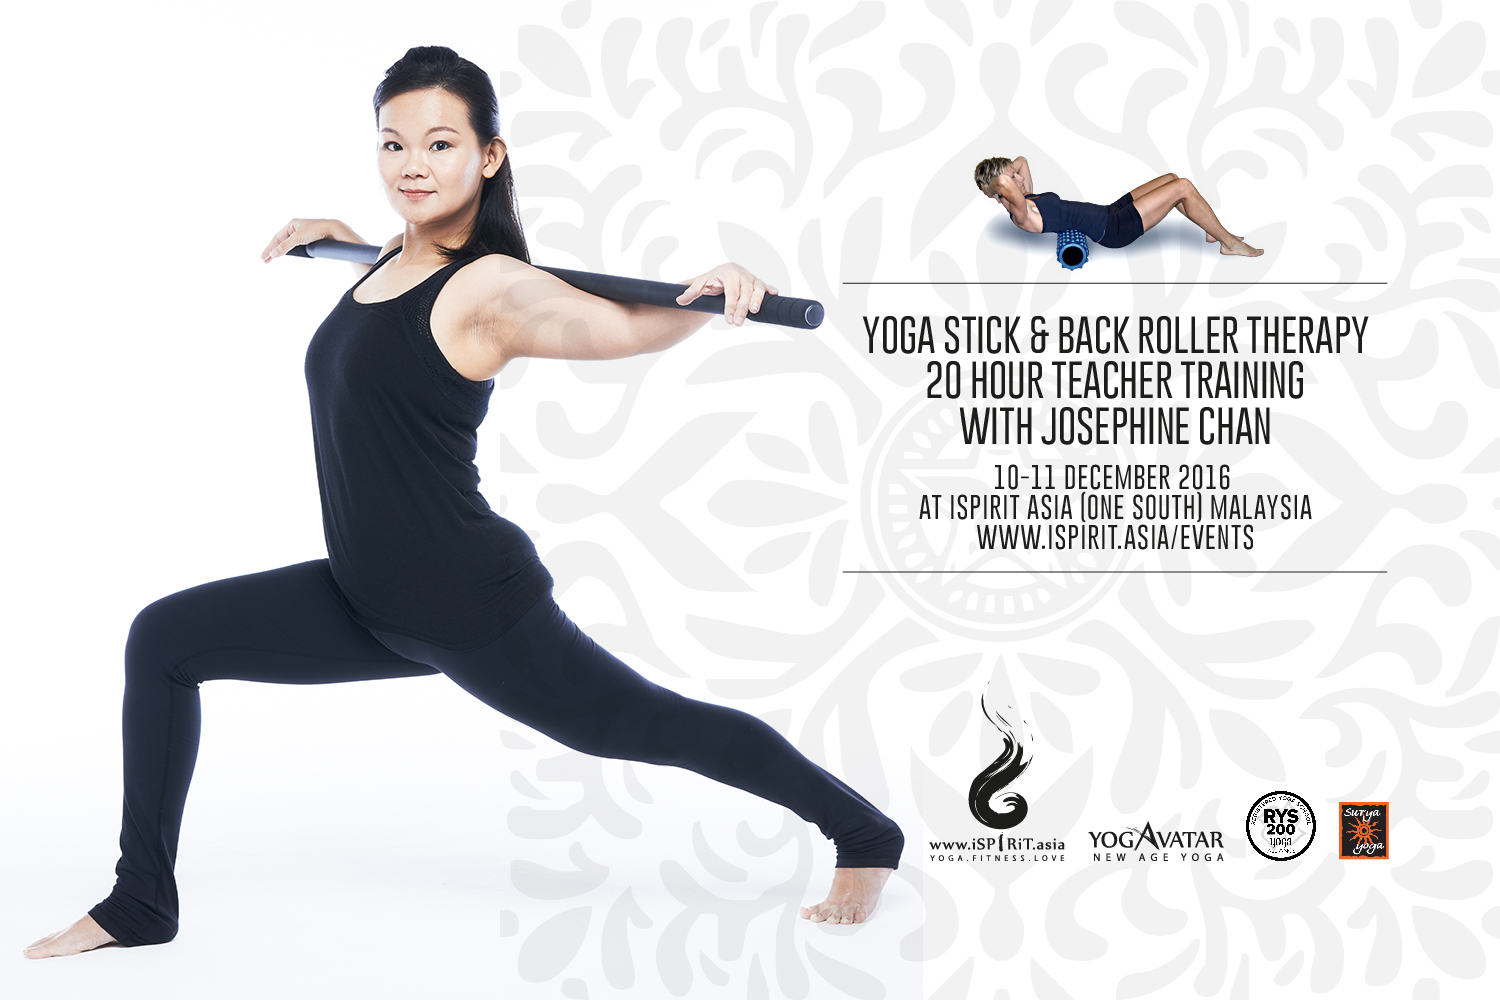 10-11 December 2016 @ Malaysia: Yoga Stick & Back Roller Therapy